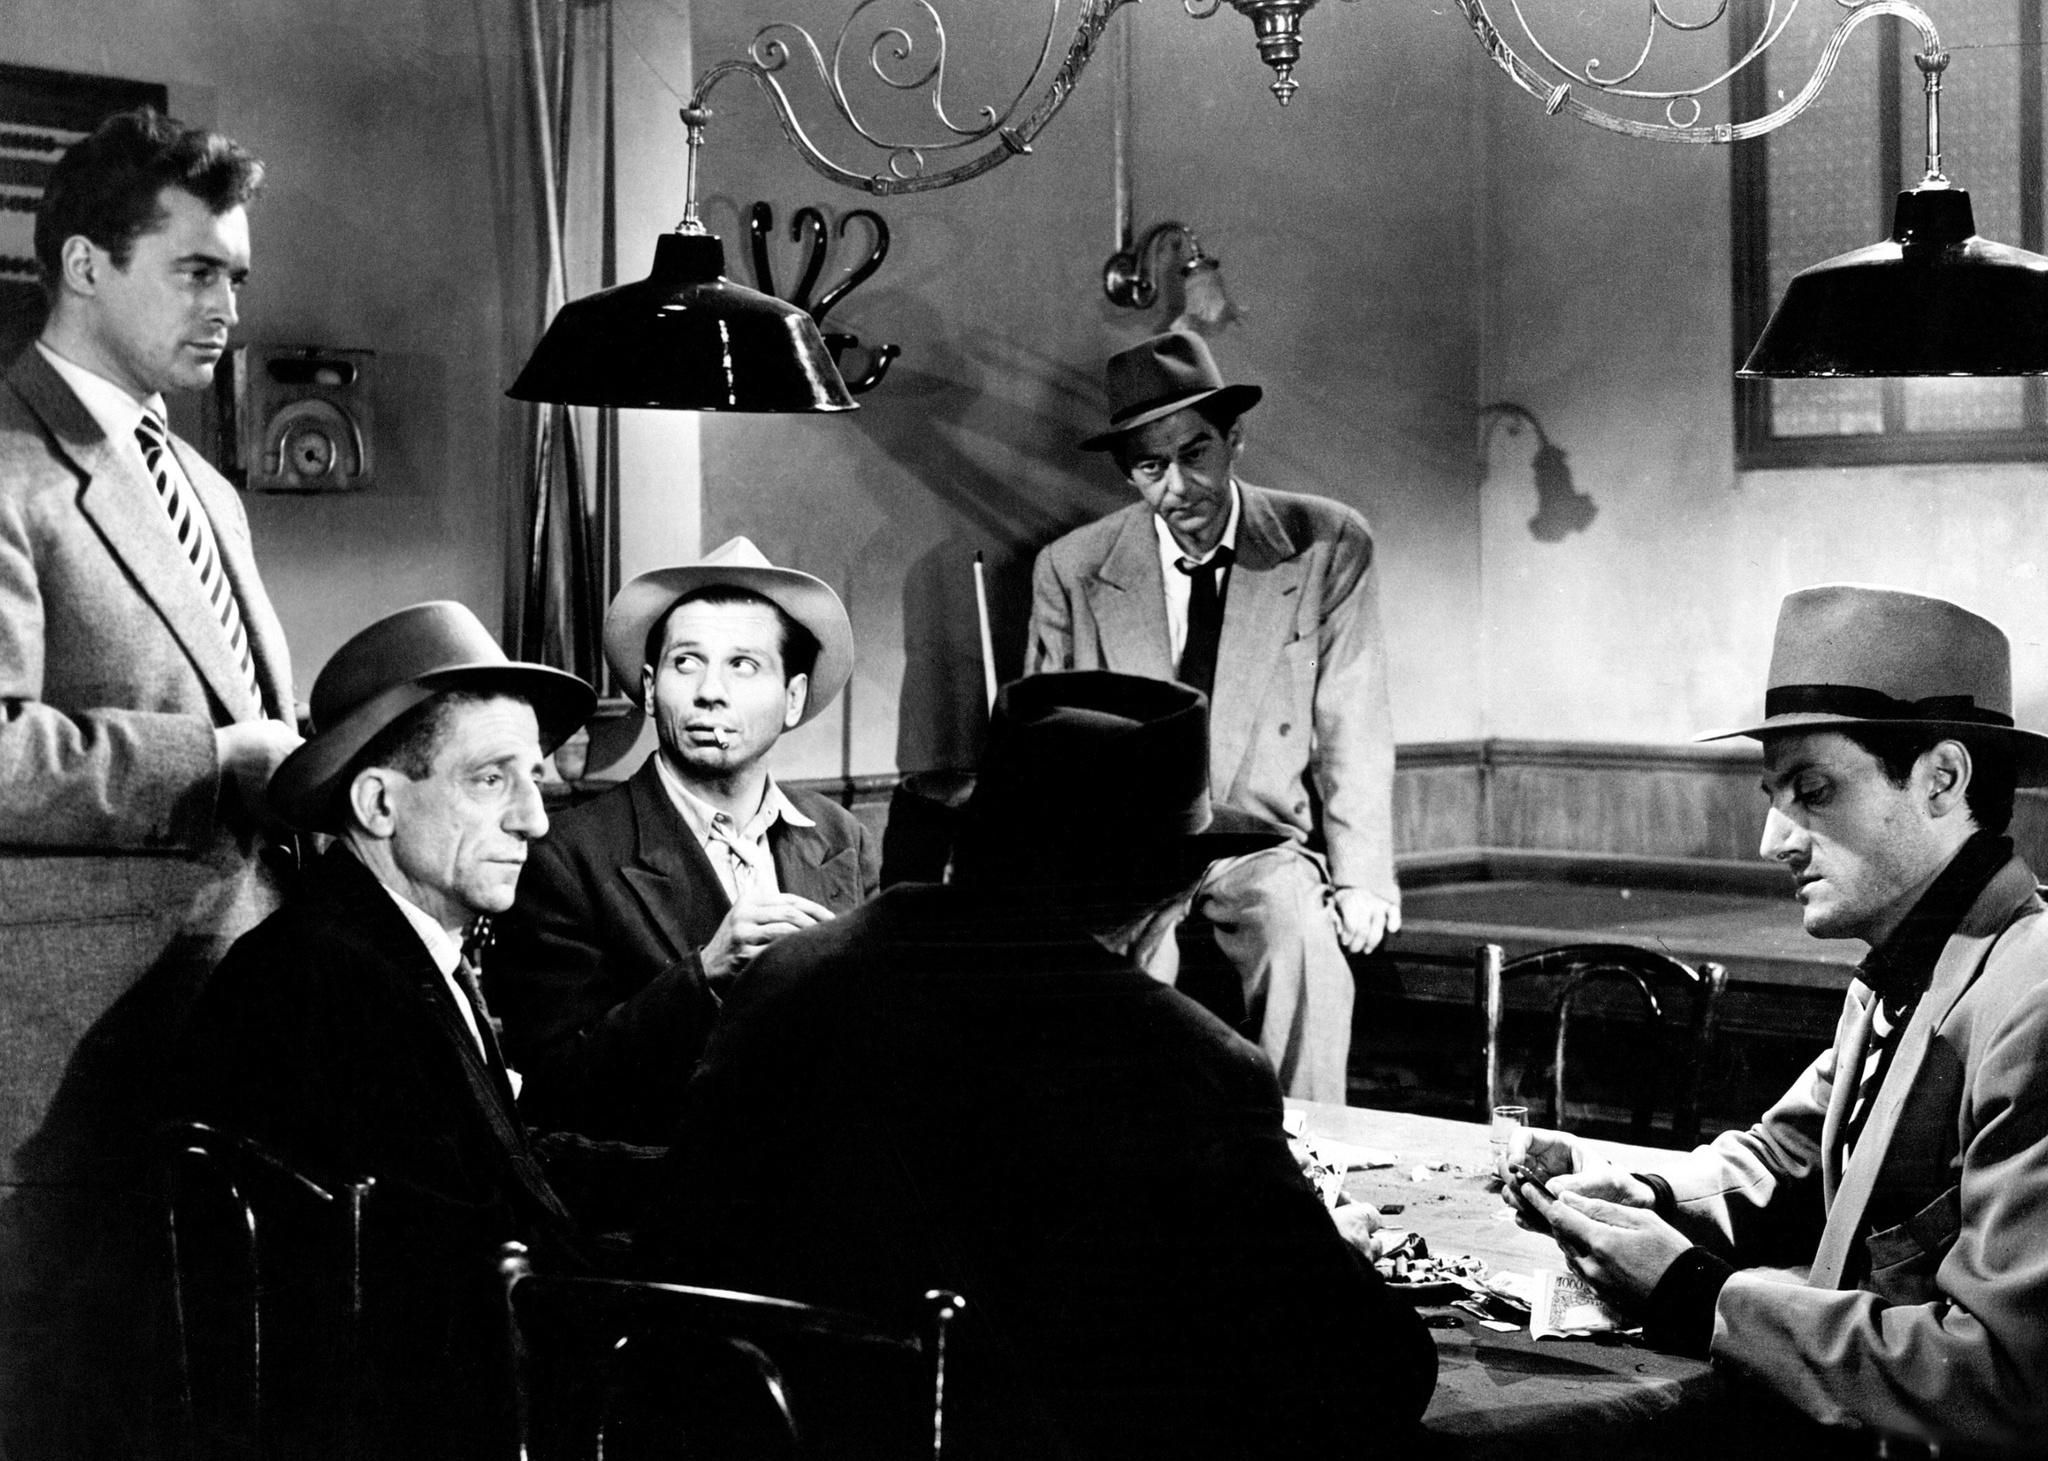 Carl Möhner and Jean Servais in a scene from Rififi.